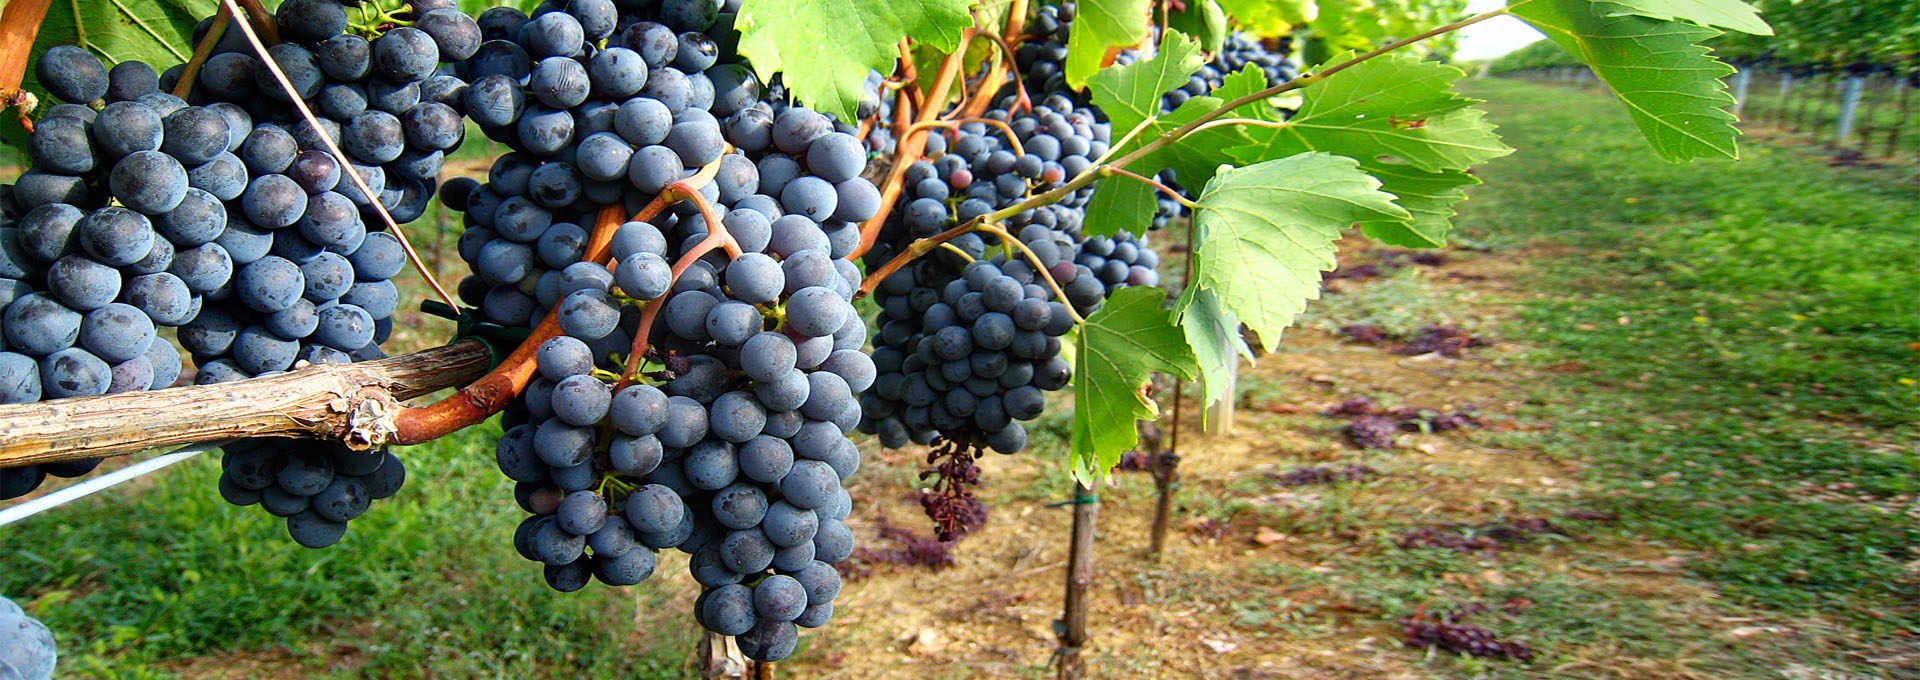 Famous on the grapevine: Sangiovese